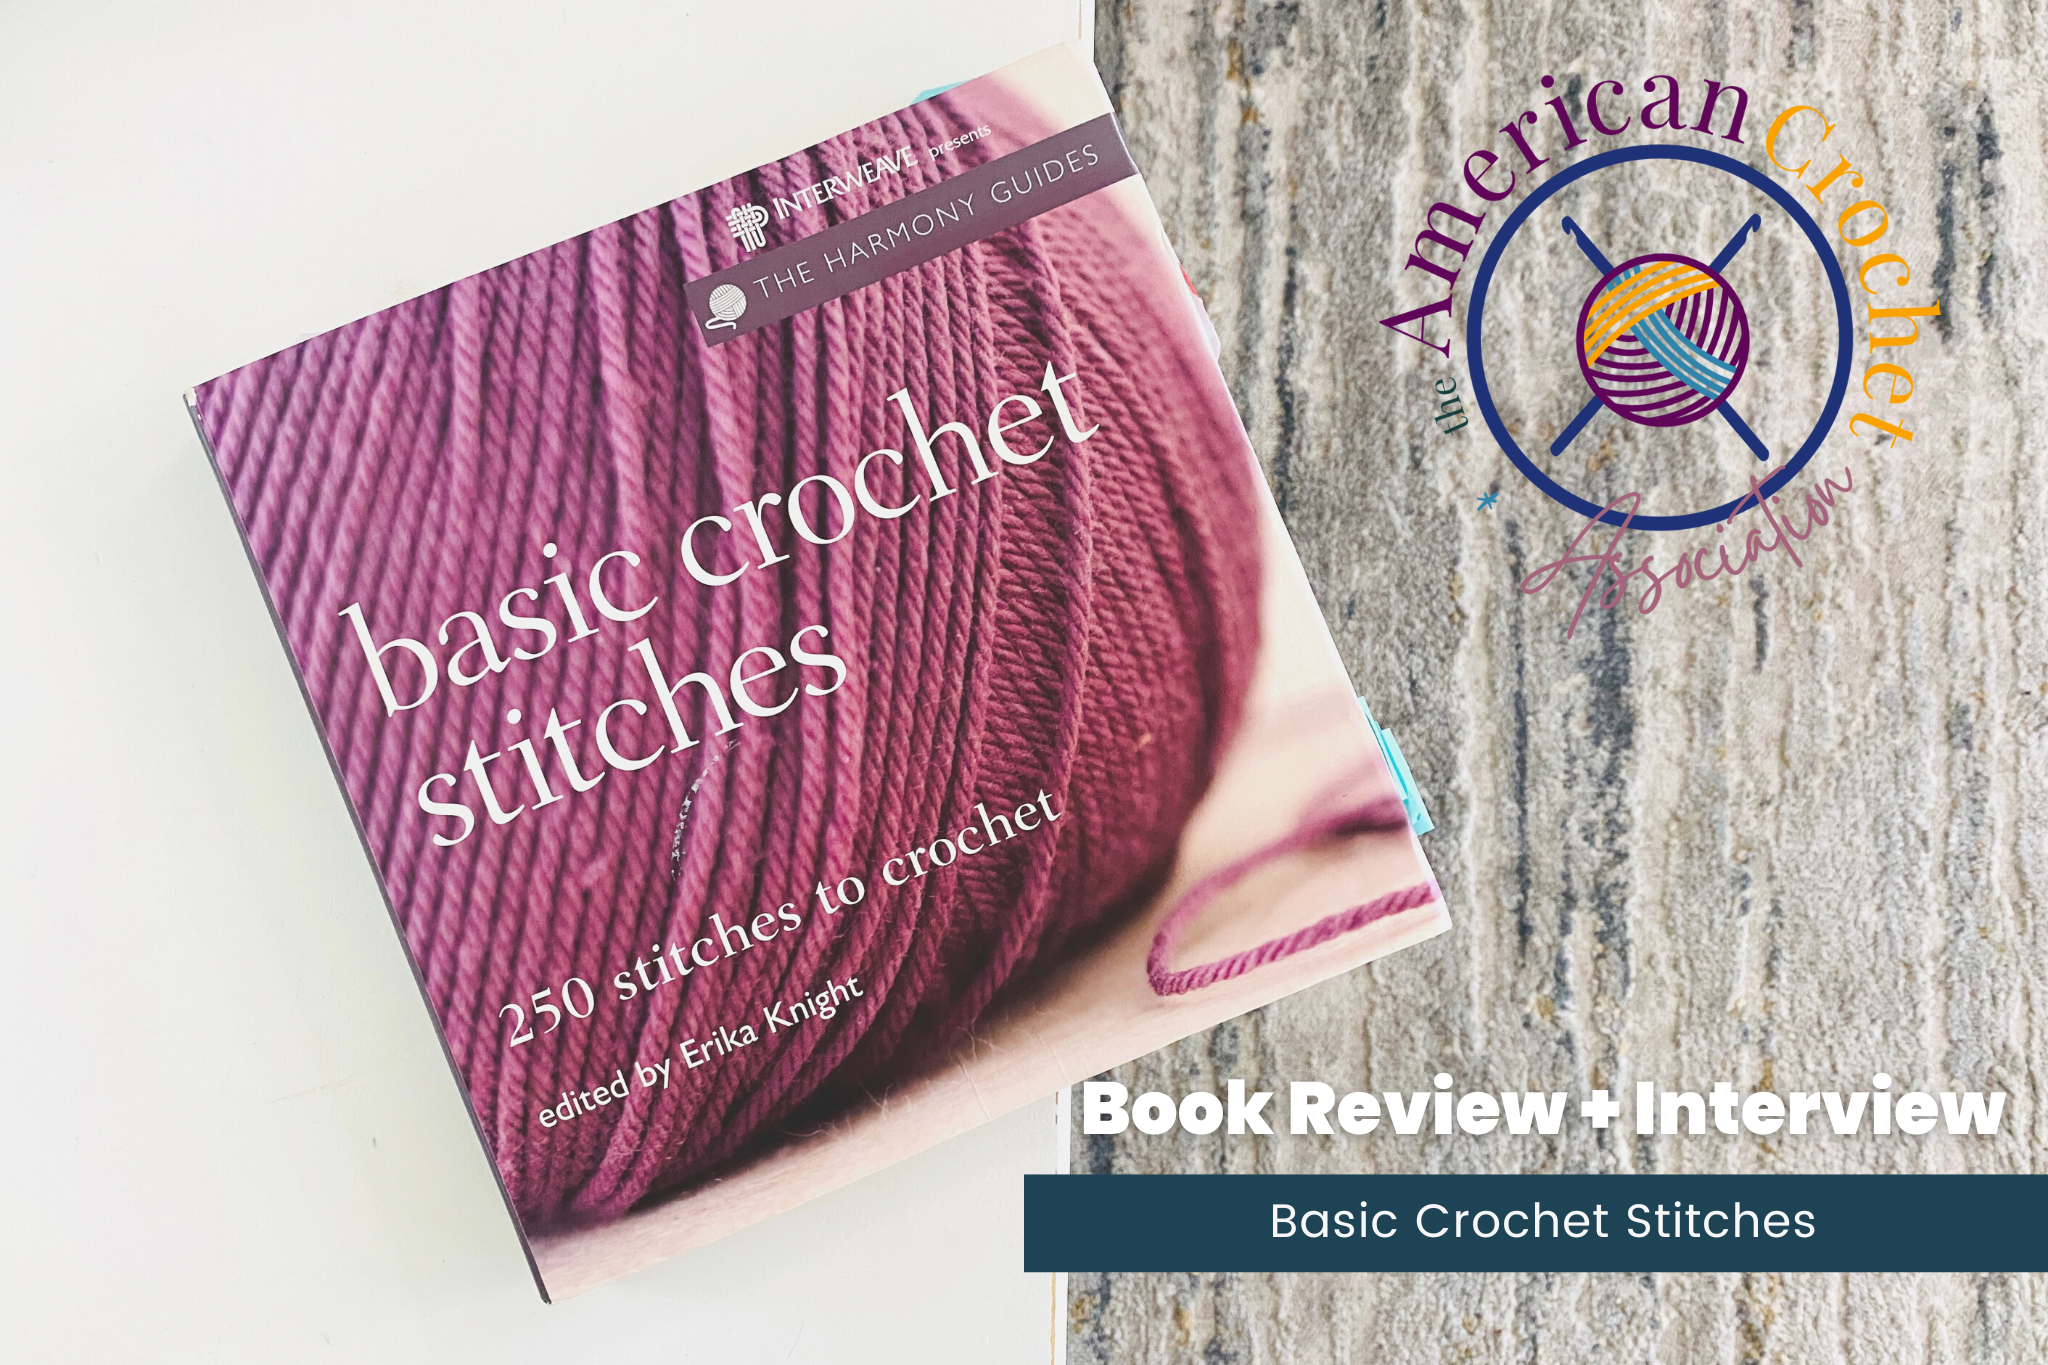 The Harmony Guides Basic Crochet Stitches Book Review